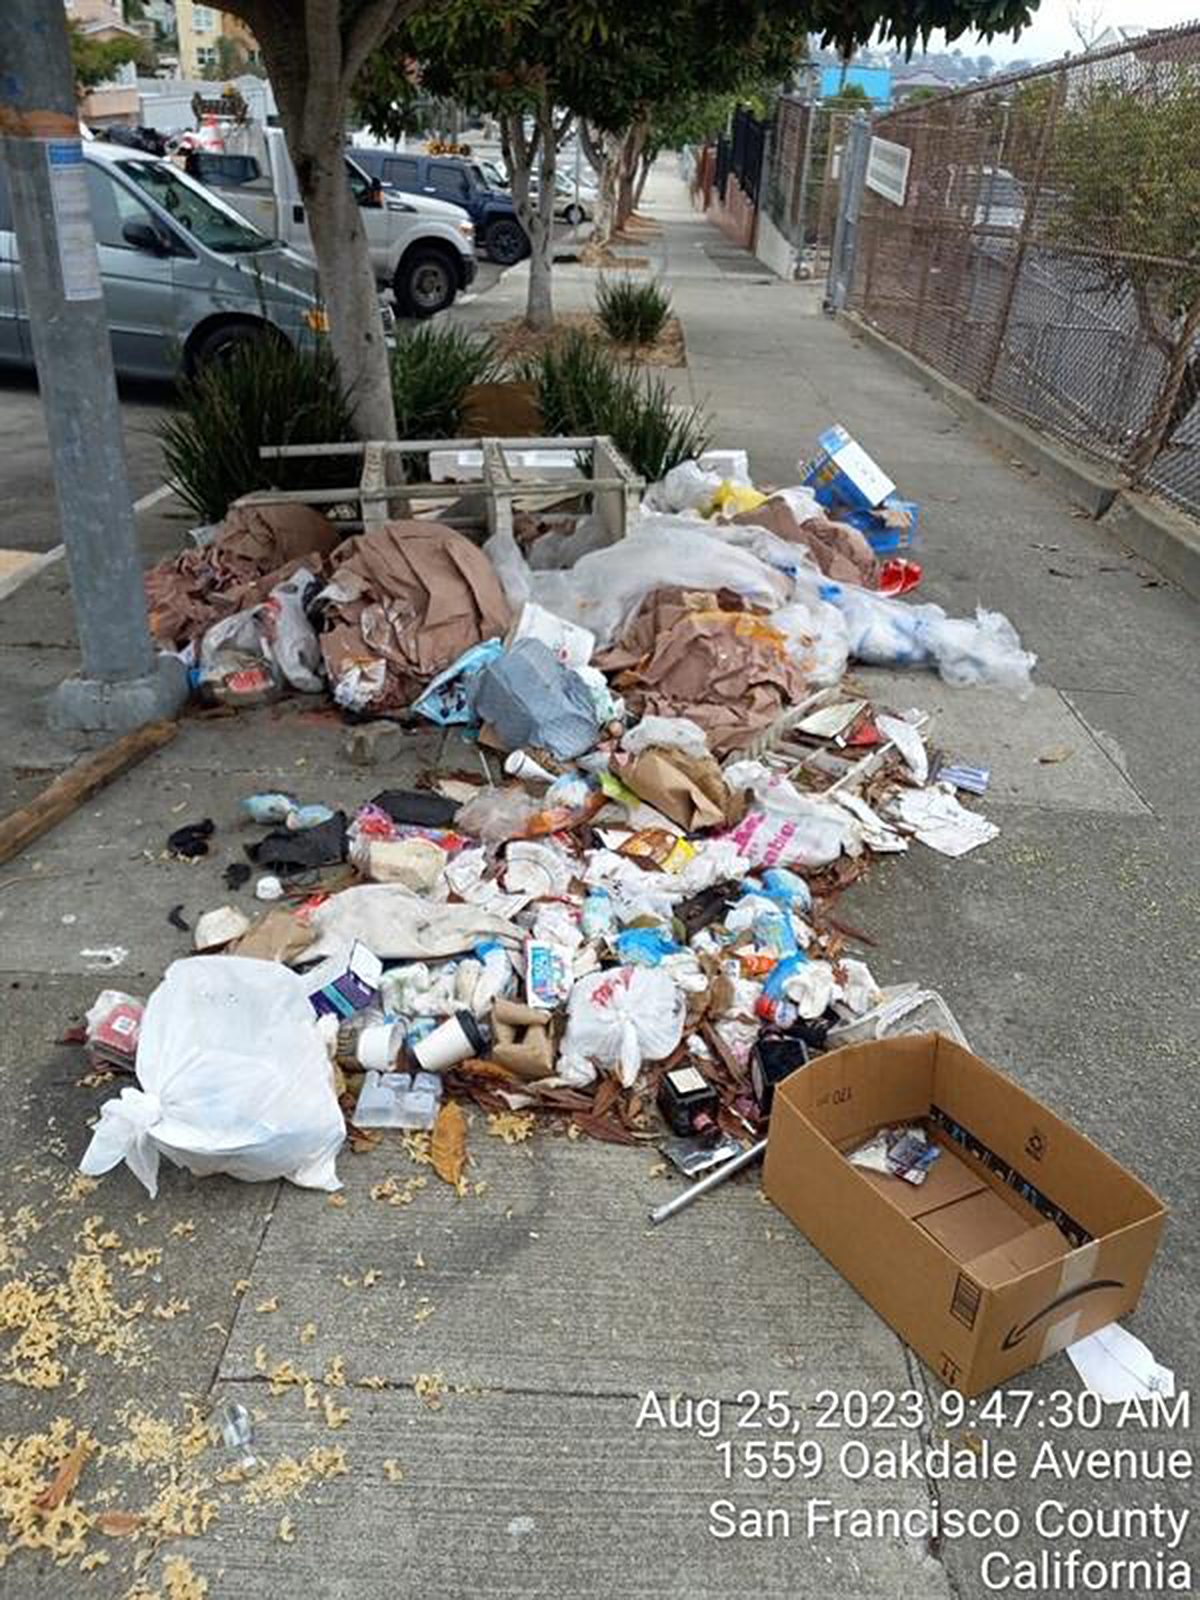 A sidewalk is cluttered with scattered trash and loose debris beside a street.